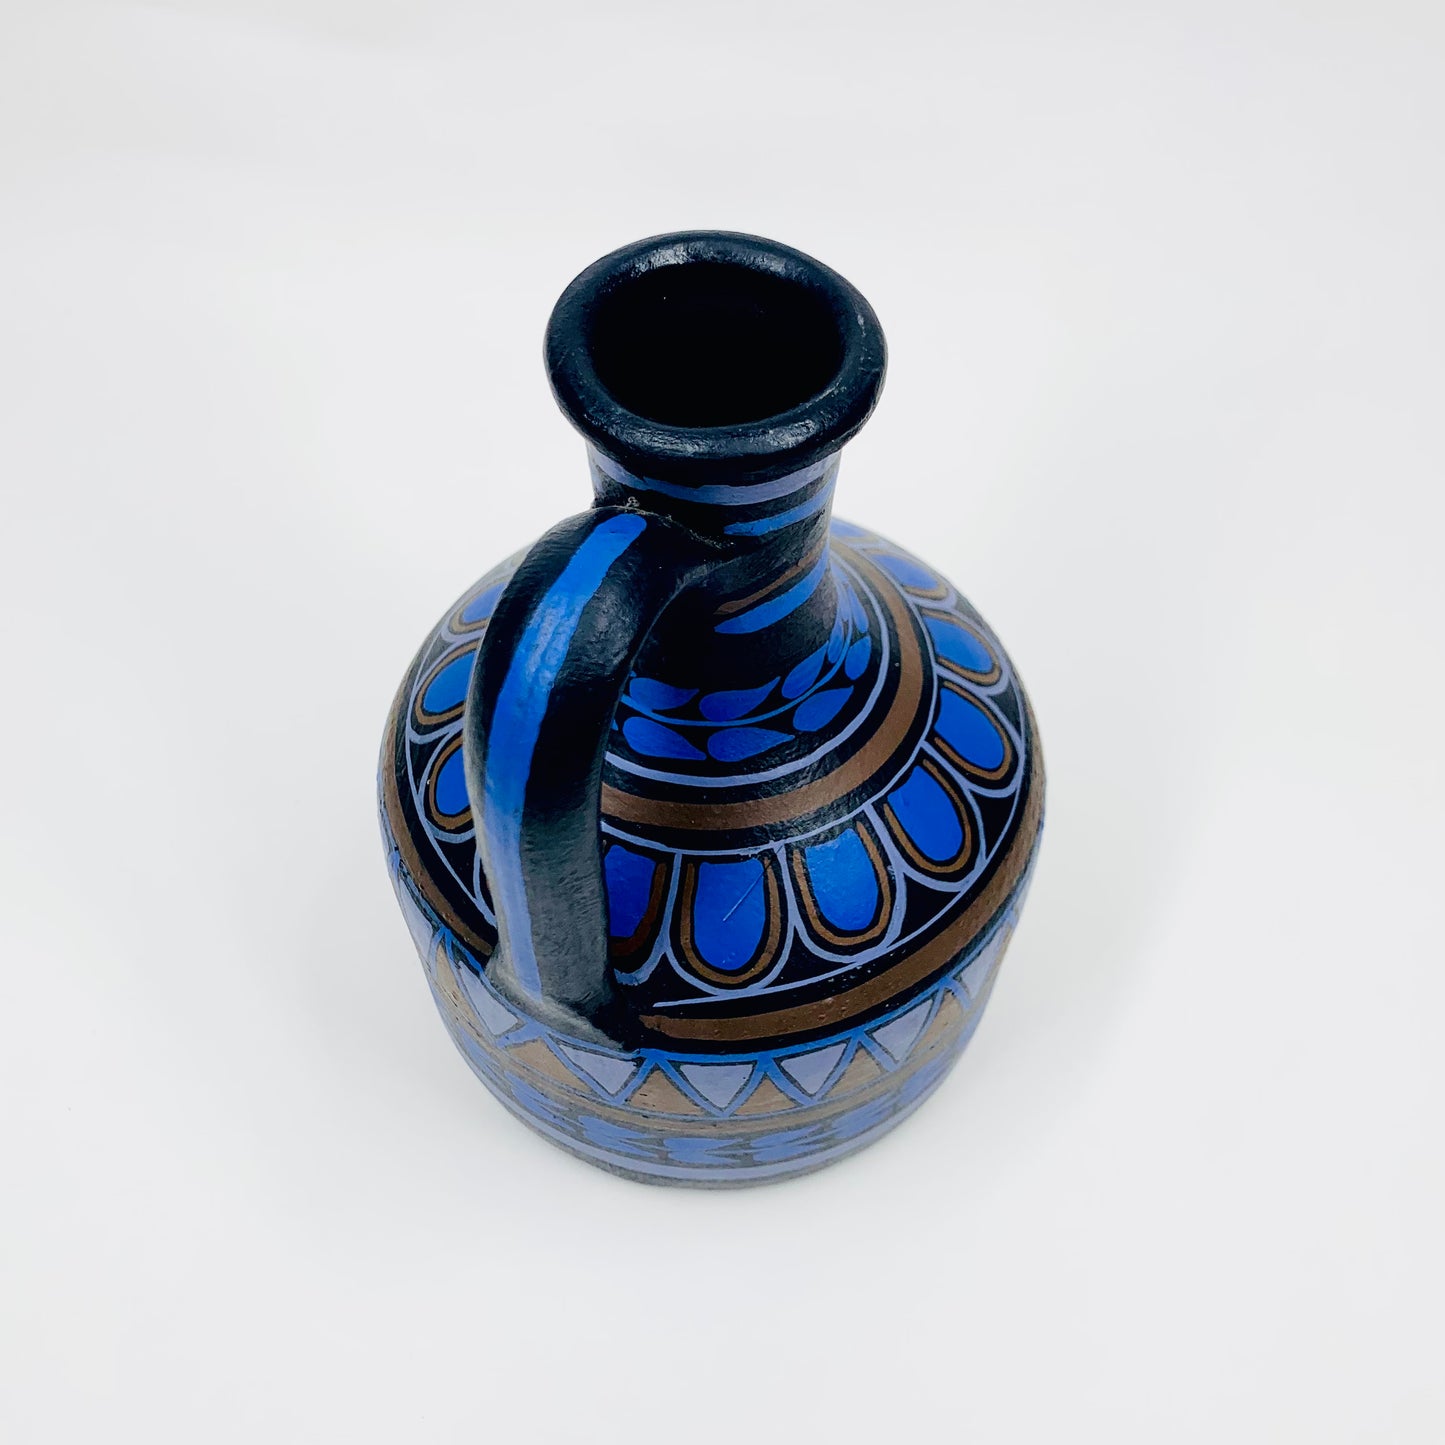 Extremely rare MCM hand painted blue pottery jug